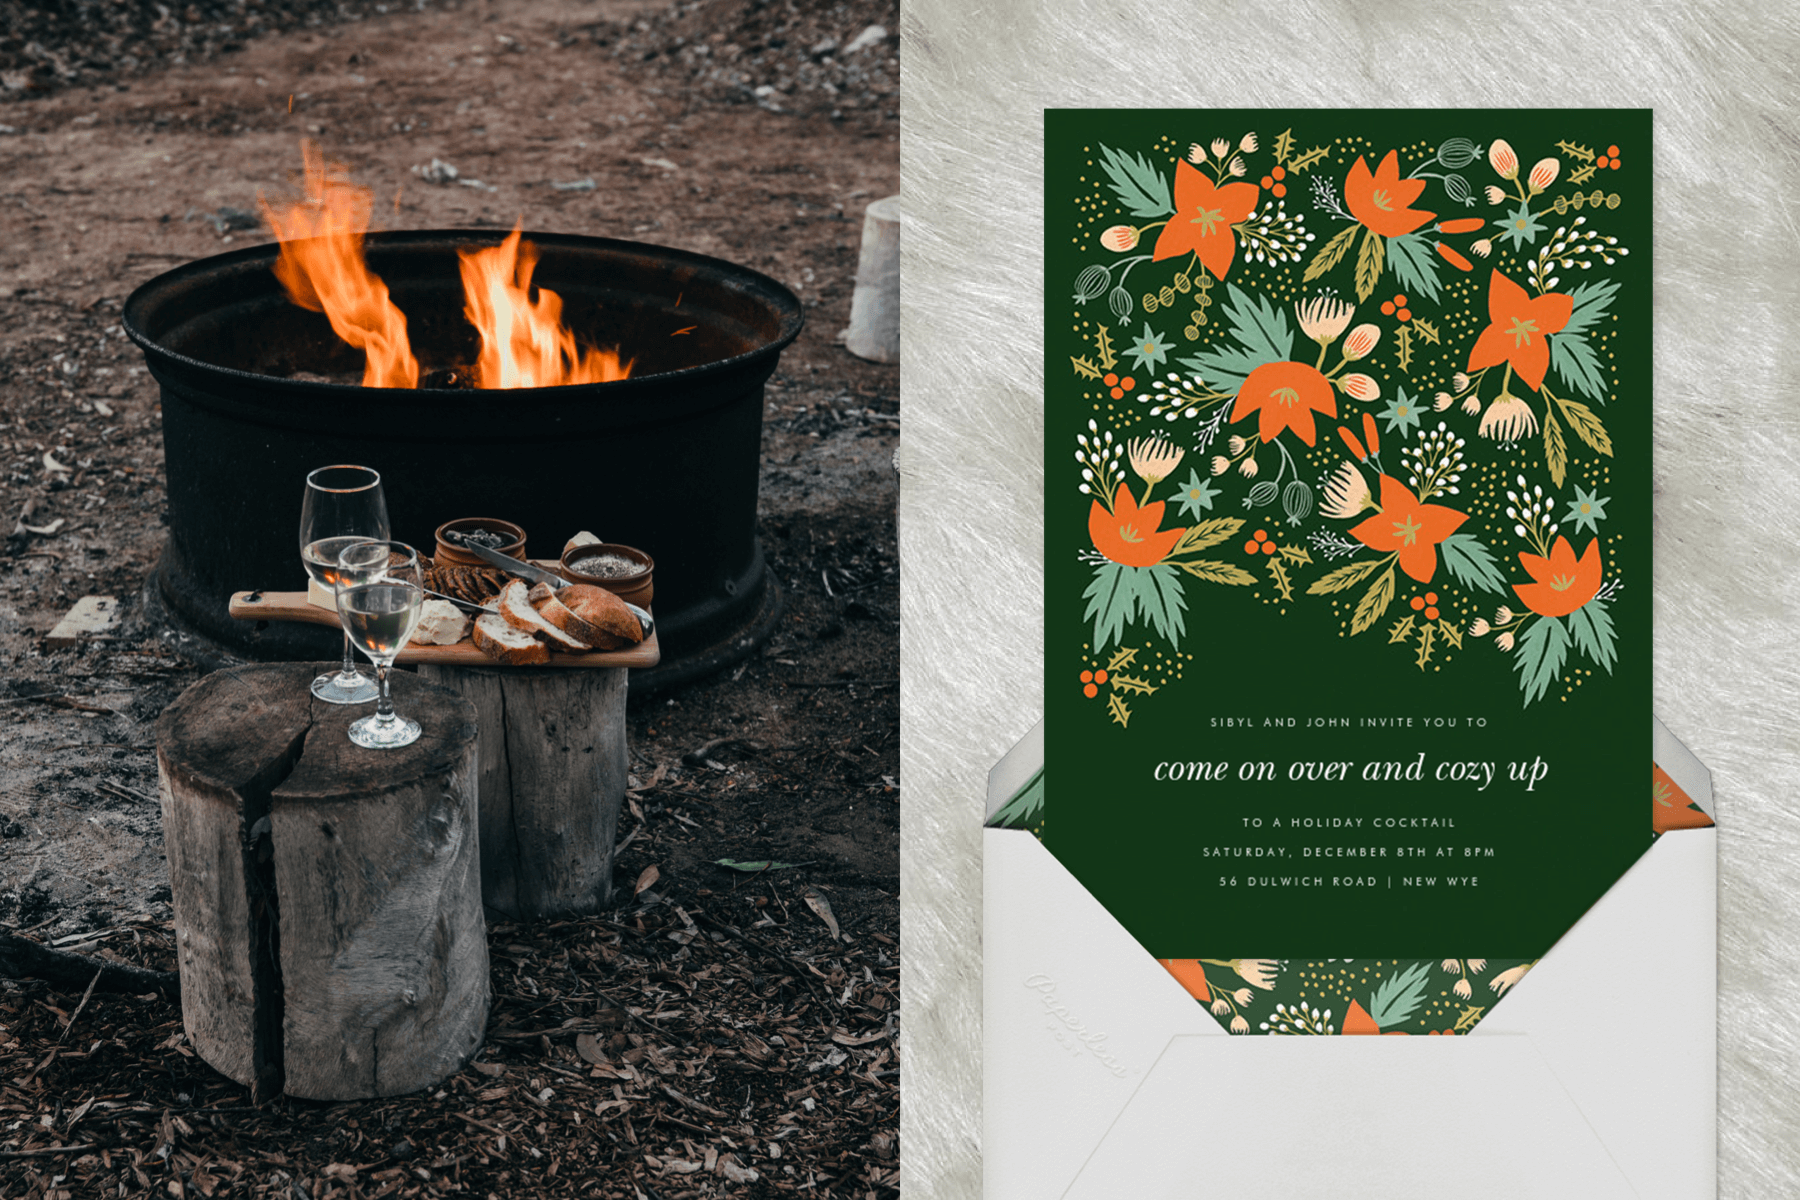 left: A charcuterie board and two wine glasses sit on tree stumps beside a fire pit. Right: A green party invitation with colorful floral illustrations. 